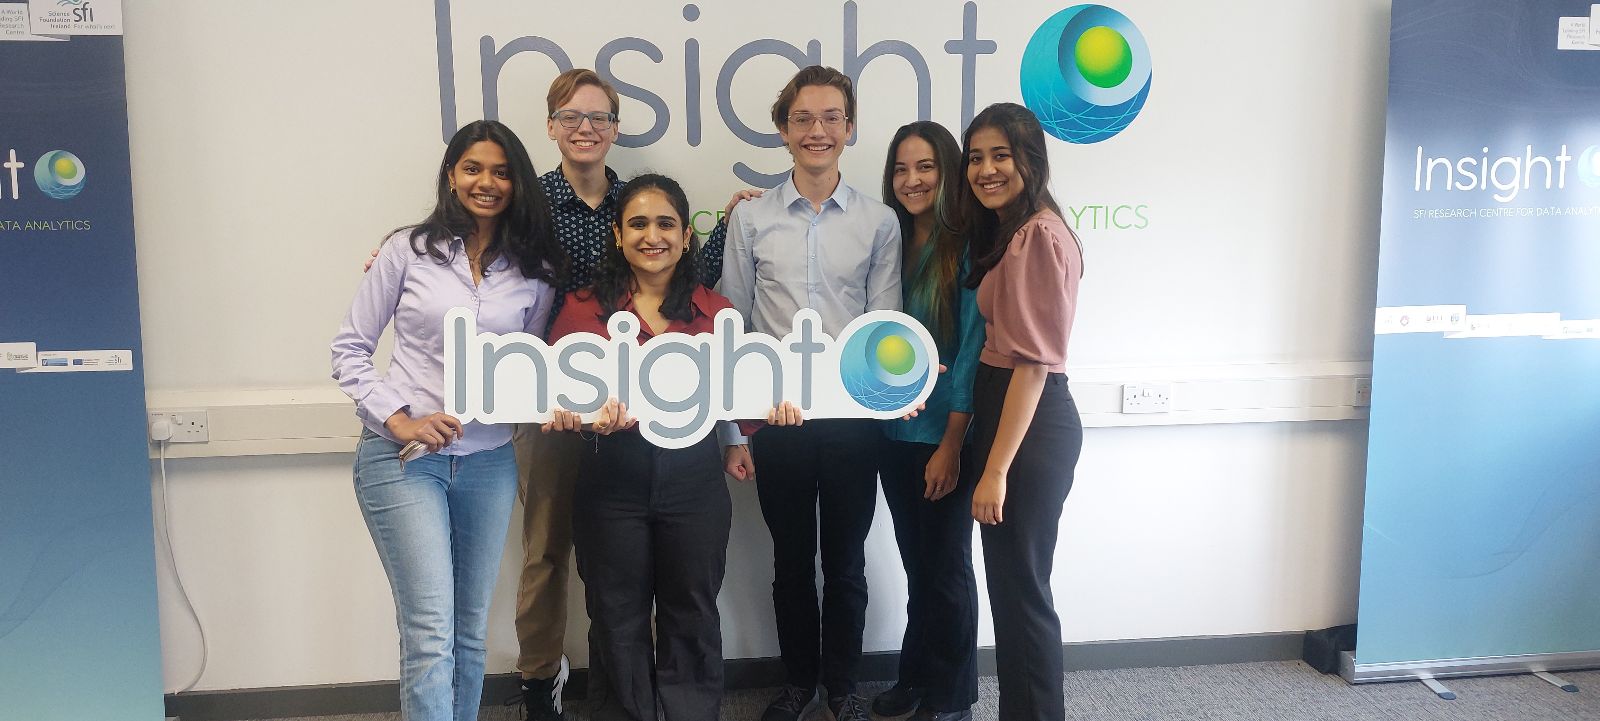 ASU students with Insight logo